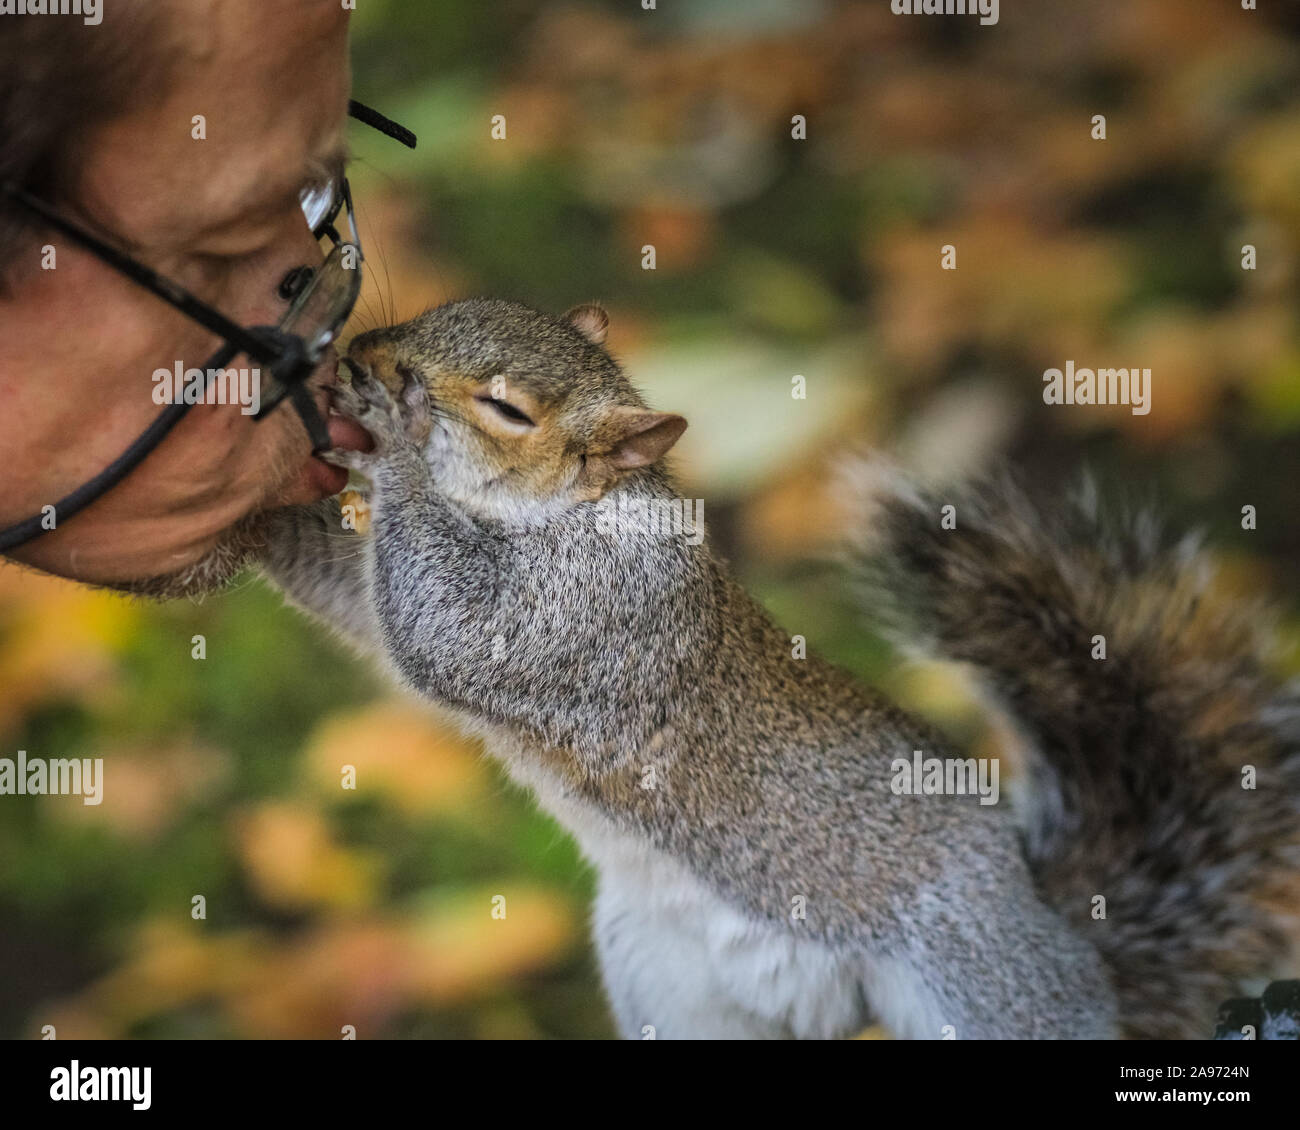 St James's Park, London, UK, 13th November 2019.  A man who regularly feeds the animals gets a kiss from one of the fluffy squirrels. Squirrels in London's St James's Park in Westminster enjoy the late autumn sunshine, digging for nuts and playing in the colourful fallen leaves. Credit: Imageplotter/Alamy Live News Stock Photo